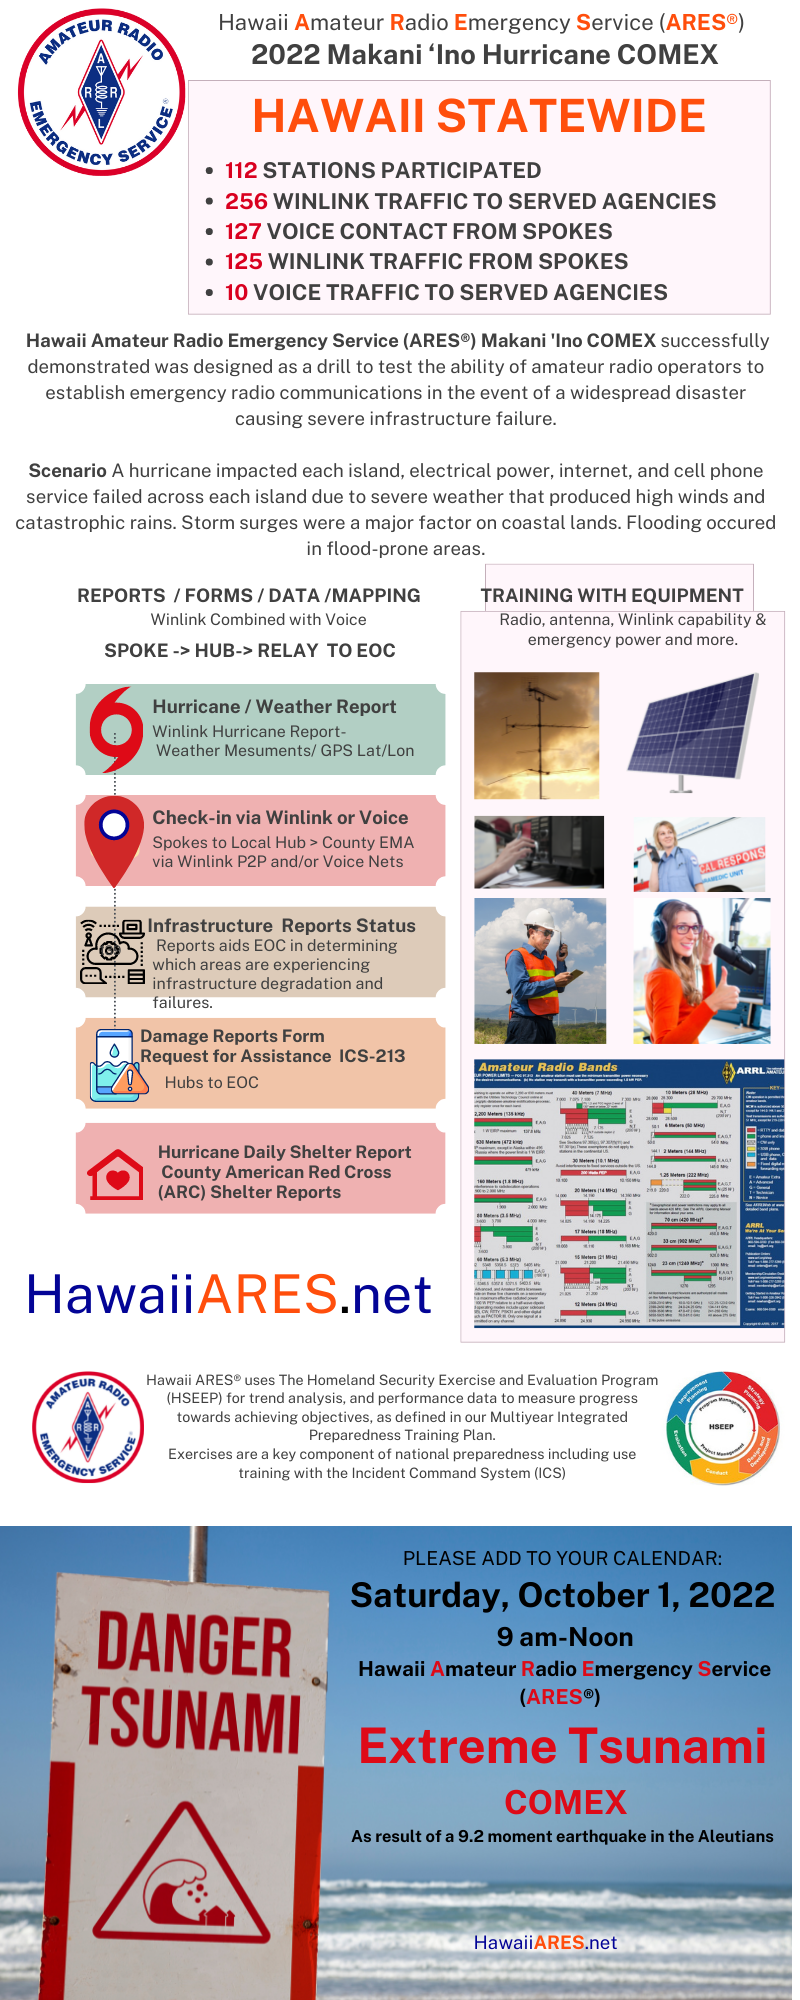 About Hawaii ARES pic